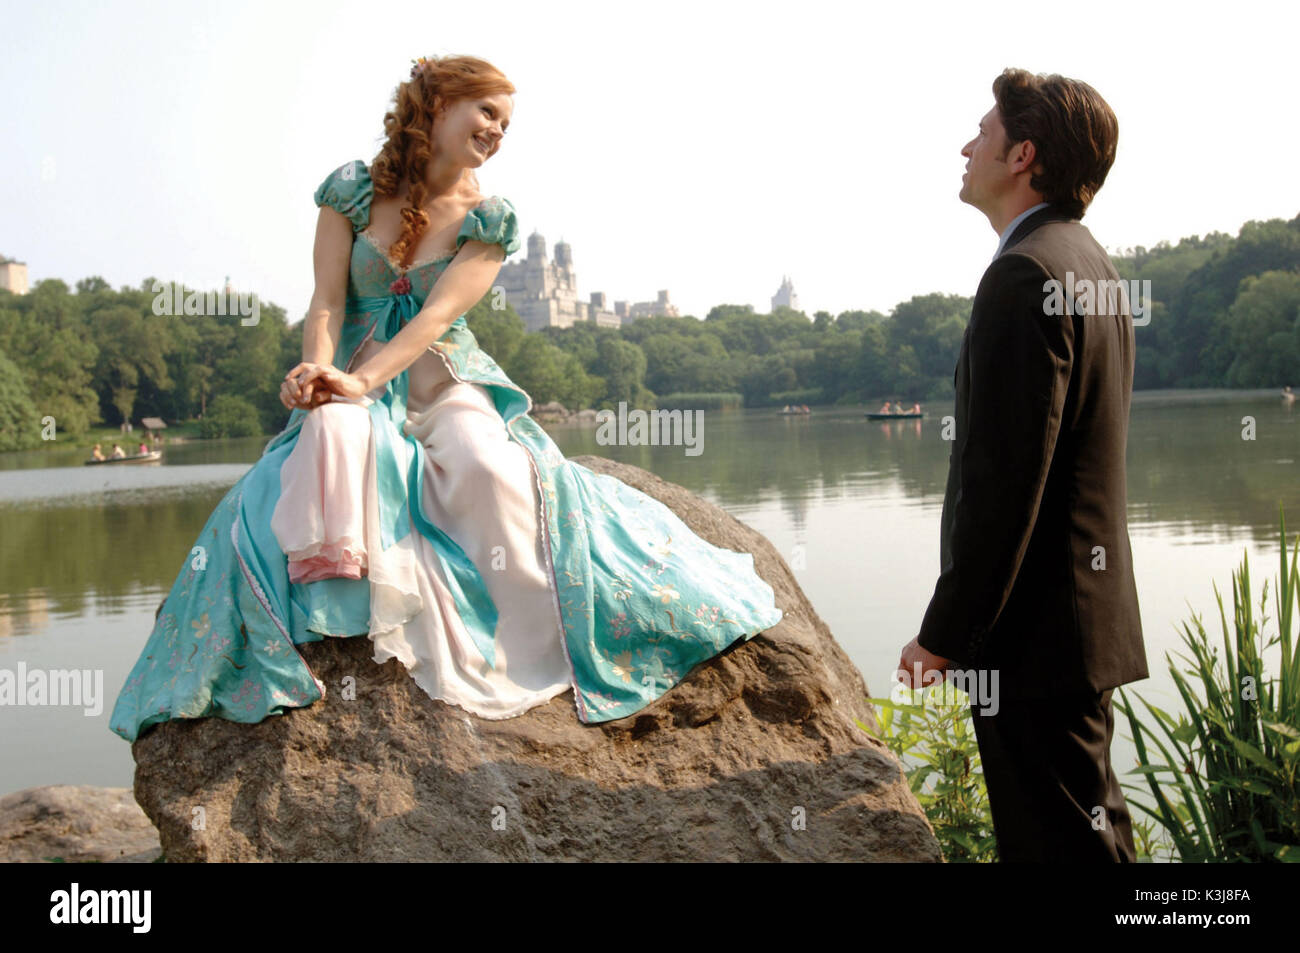 A classic Disney fairytale collides with modern-day New York City in a story about a fairytale princess, Giselle (AMY ADAMS), from the past who is thrust into present-day by the evil Queen Narissa/Hag (SUSAN SARANDON). Soon after her arrival, Princess Giselle begins to change her views on life and love after meeting a handsome lawyer (PATRICK DEMPSEY). Can a storybook view of romance survive in the real world? The chipmunk Pip is Giselle's trusted friend. JAMES MARSDEN is Prince Edward and IDINA MENZEL is Nancy. ENCHANTED is directed by Kevin Lima. ENCHANTED [US 2007]  AMY ADAMS, PATRICK DEMPS Stock Photo